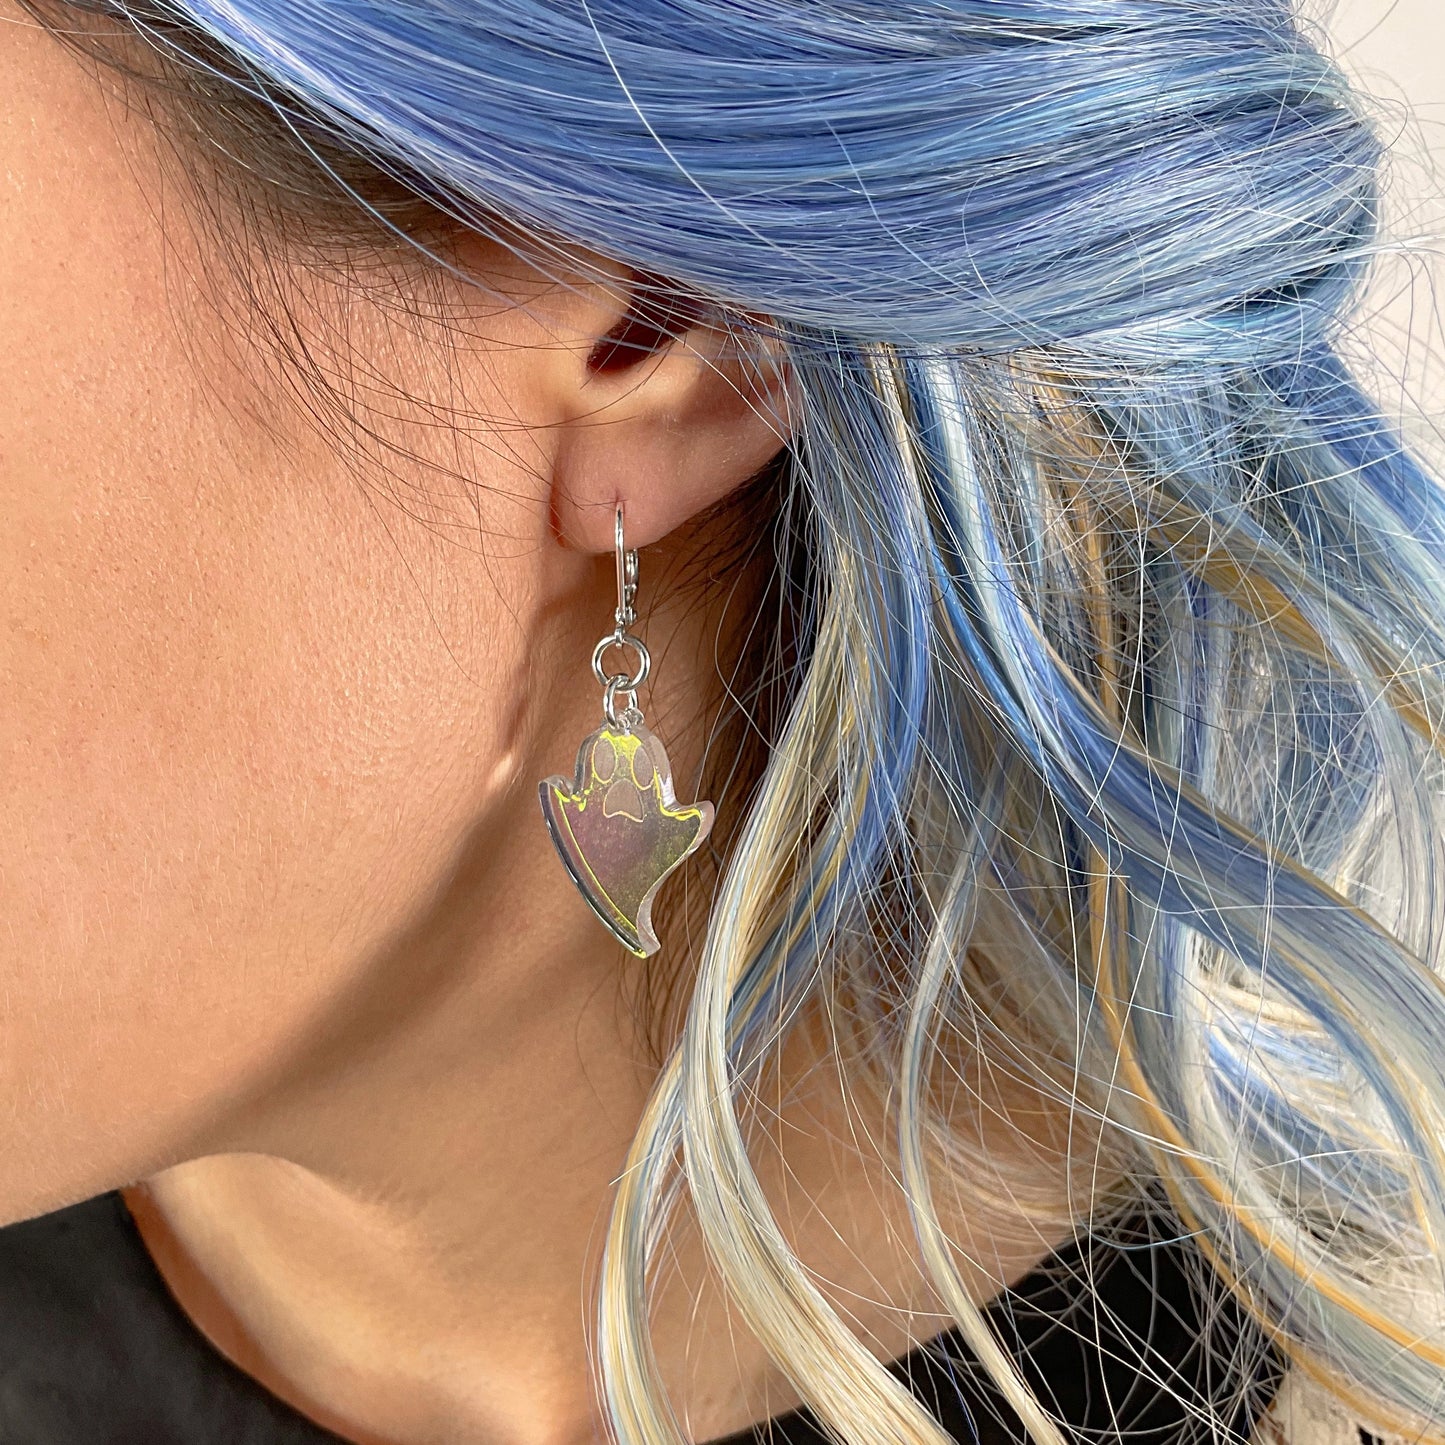 That's the Spirit! Earrings in Iridescent